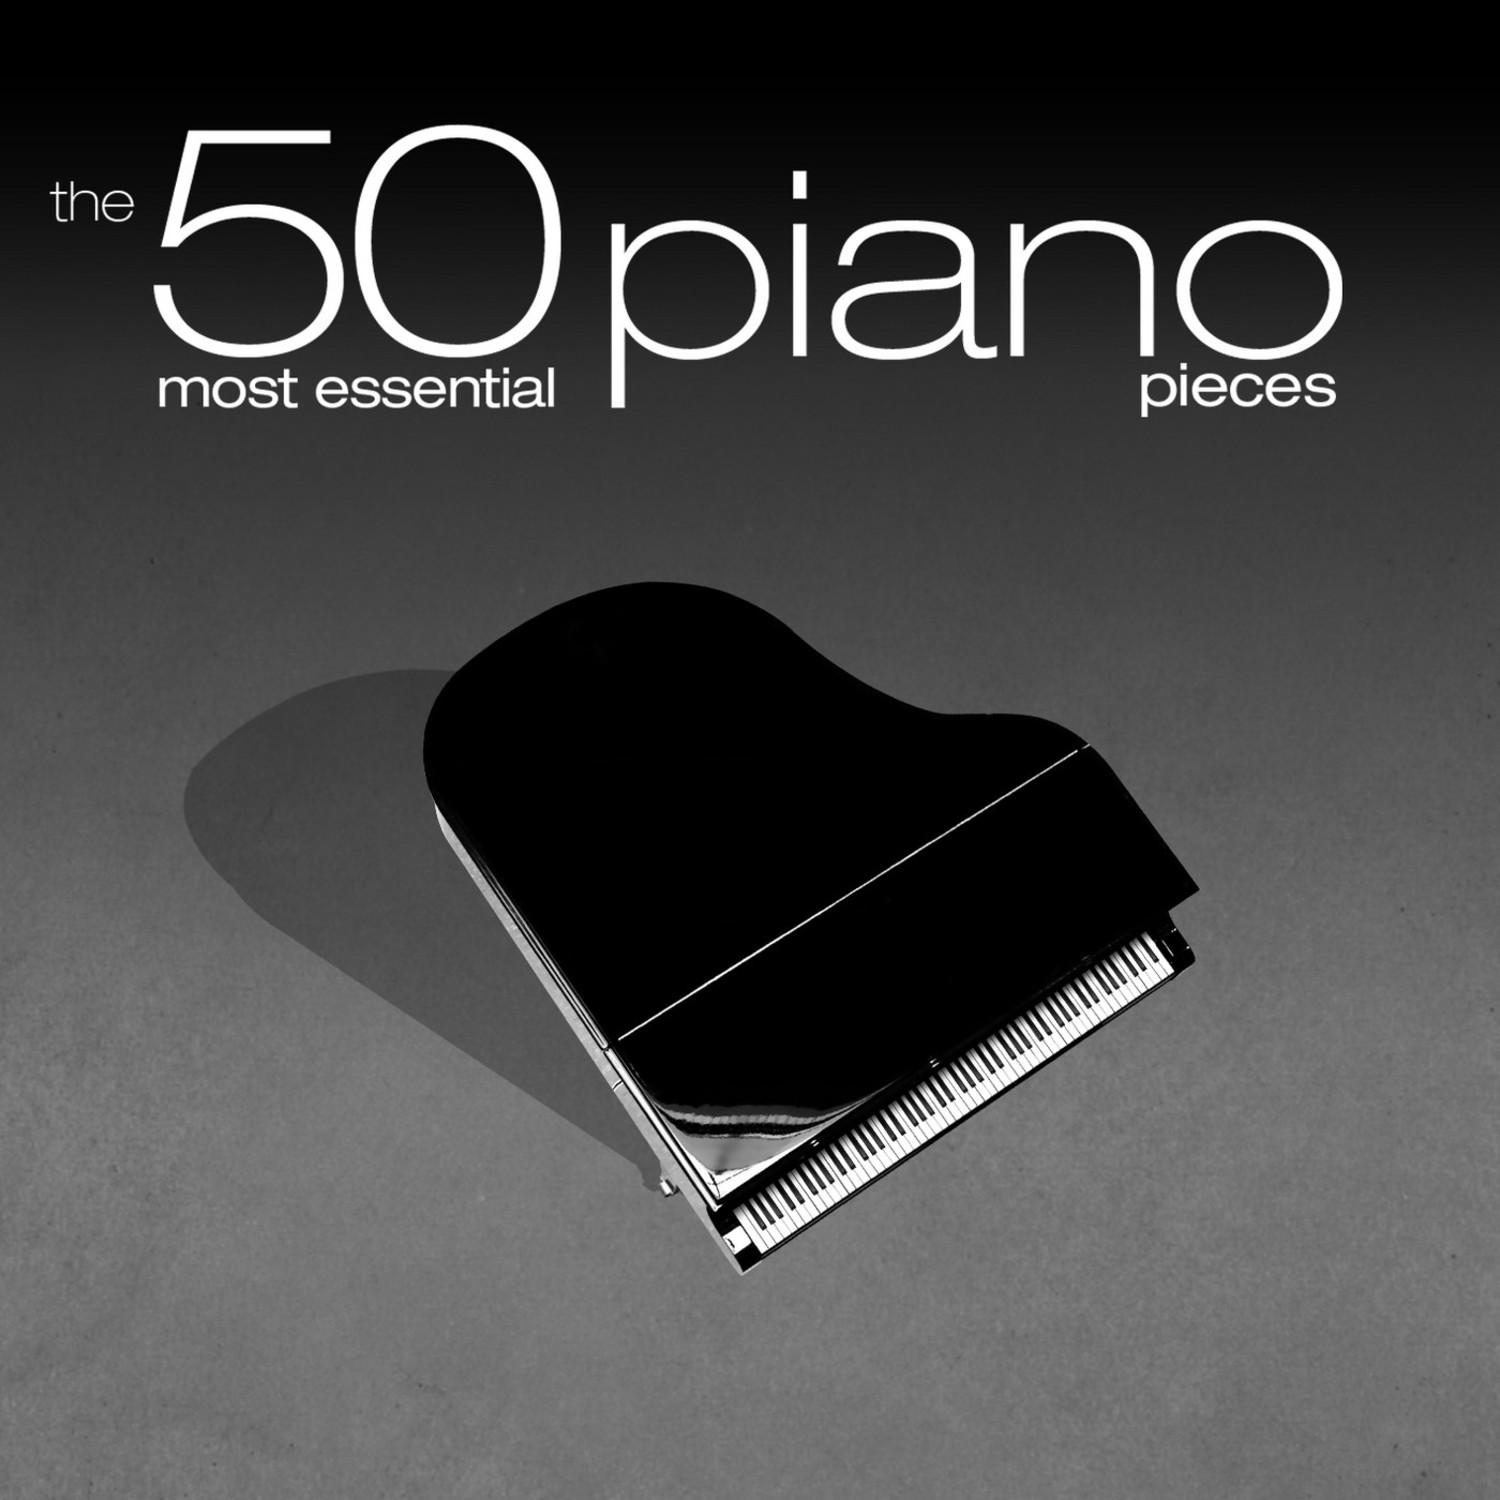 The 50 Most Essential Piano Pieces